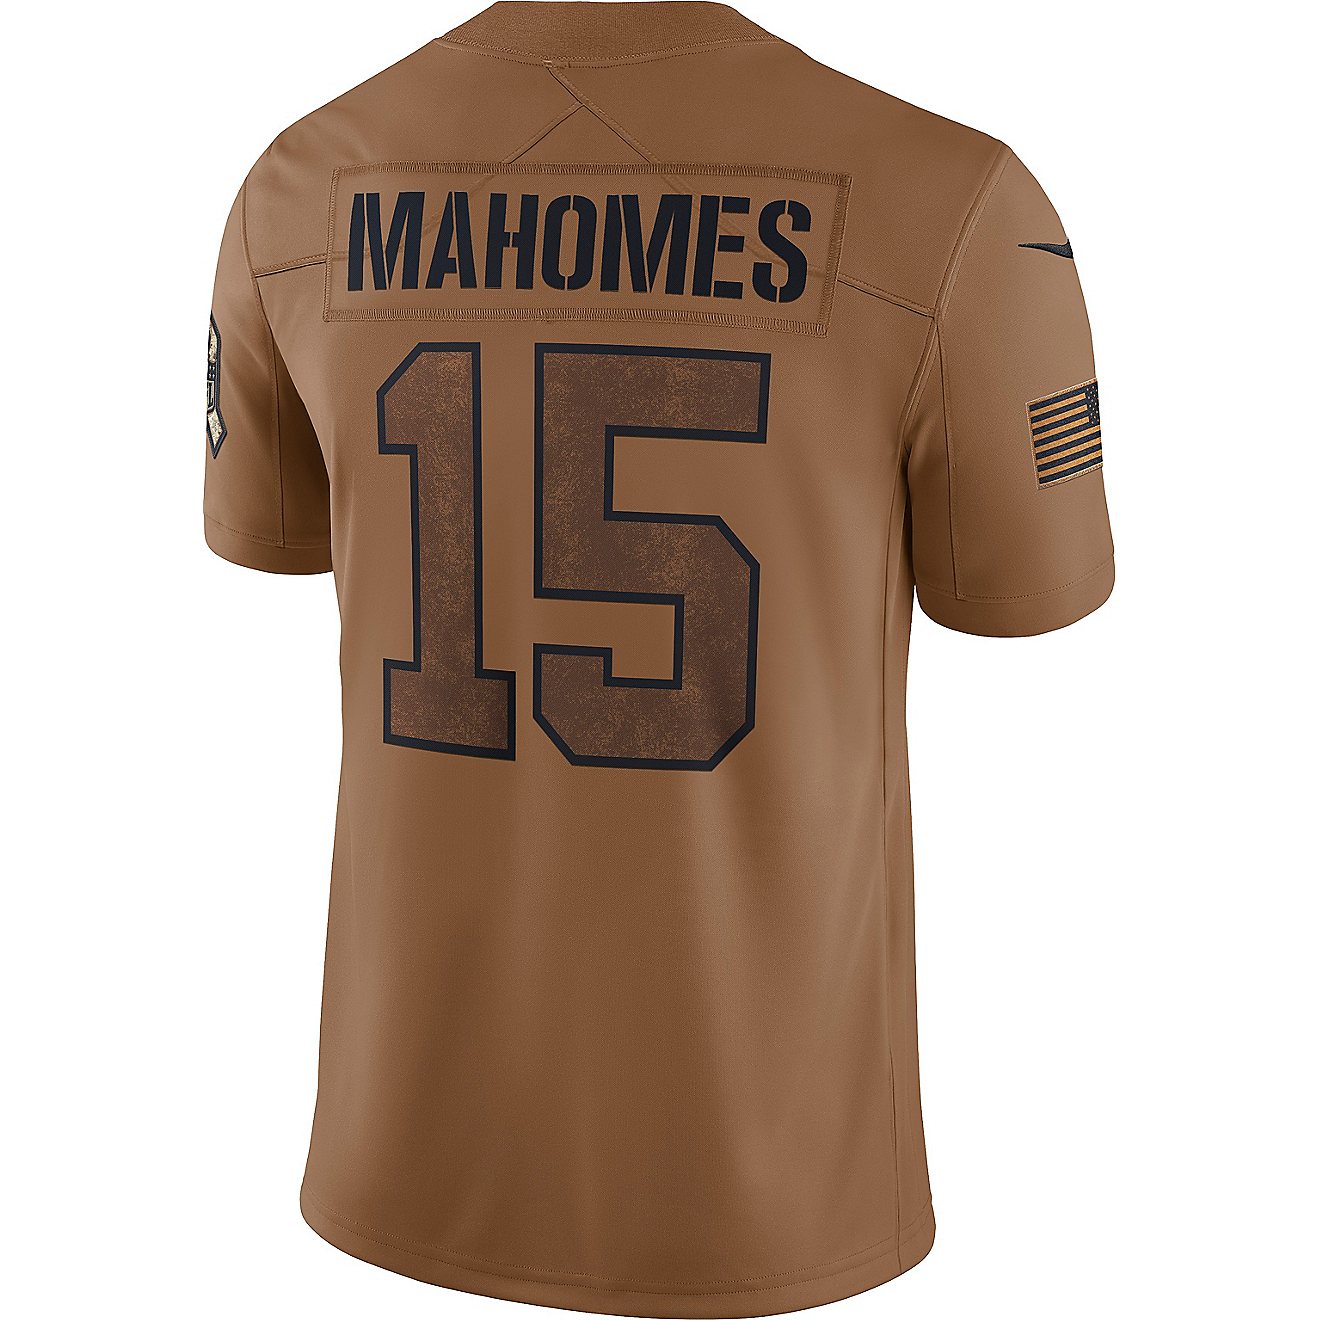 Nike Men's Kansas City Chiefs Mahomes Salute to Service Jersey                                                                   - view number 1